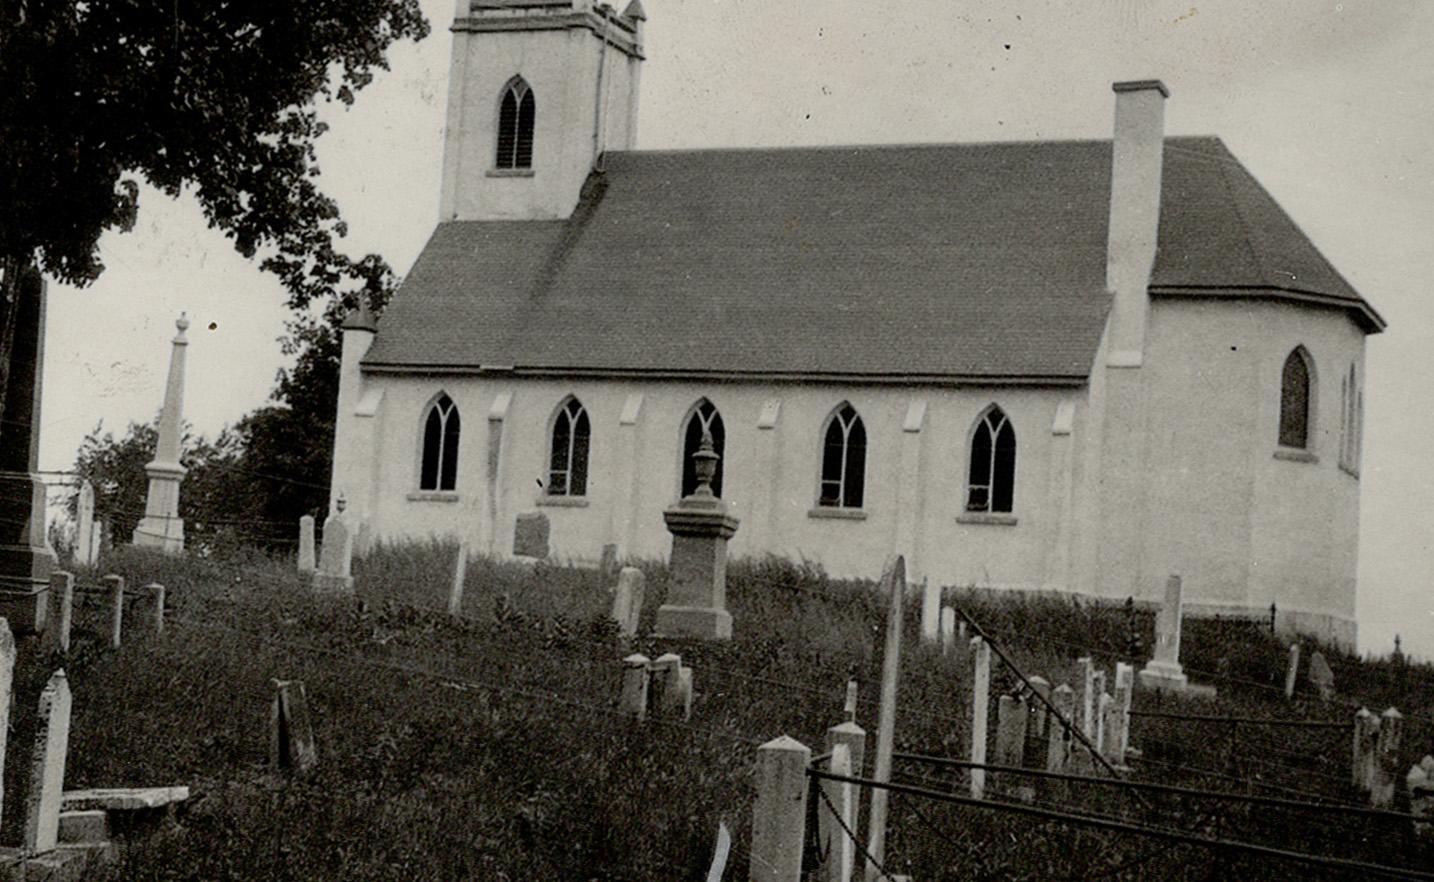 St. Johns Anglican Church at bath which was [Incomplete]